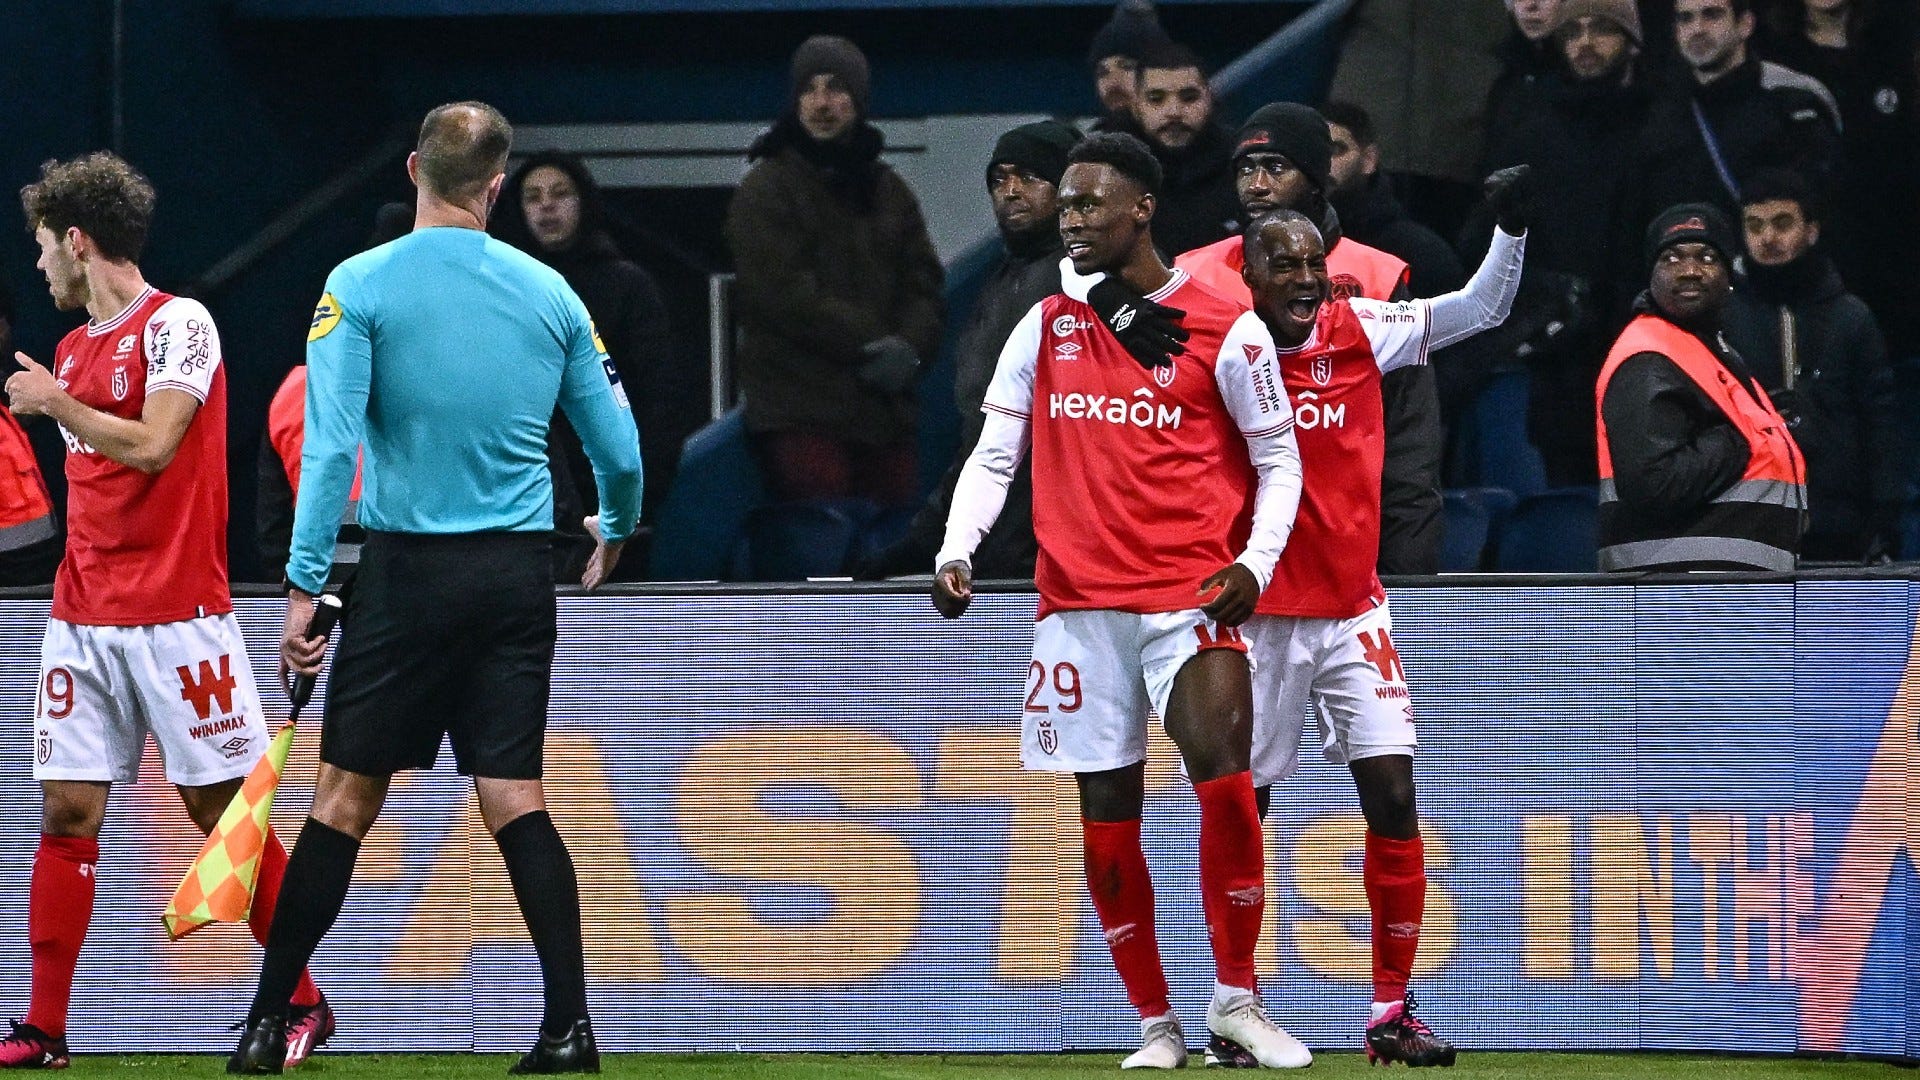 WATCH: Arsenal loanee Balogun stuns PSG with superb 96th minute equaliser  for Reims | Goal.com